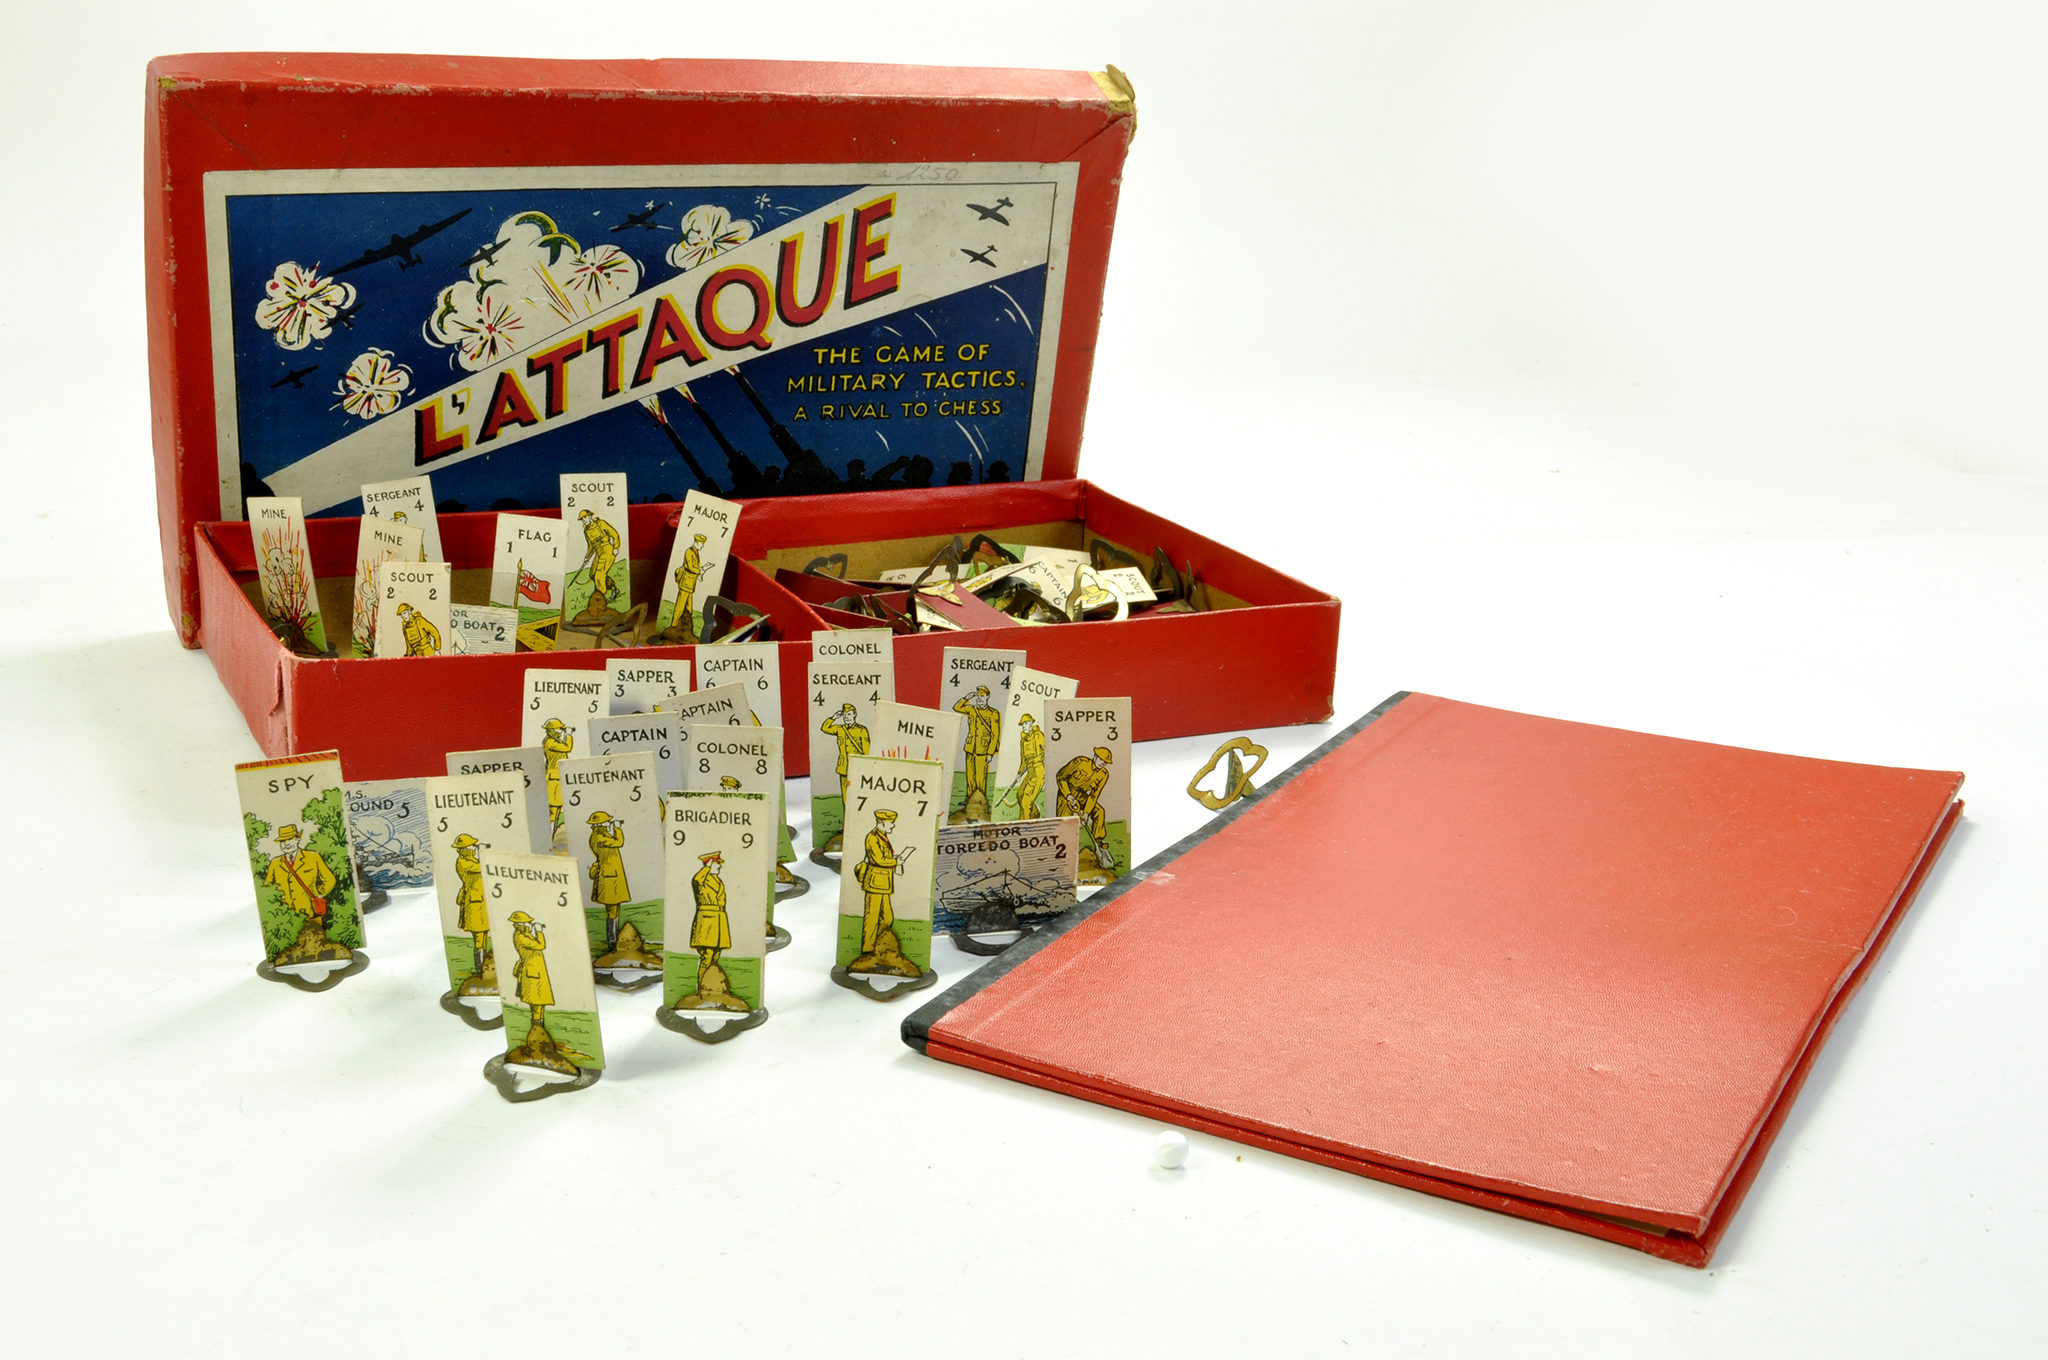 Vintage game of L'attaque. Strategy game looks predominantly complete with many figures. Enhanced